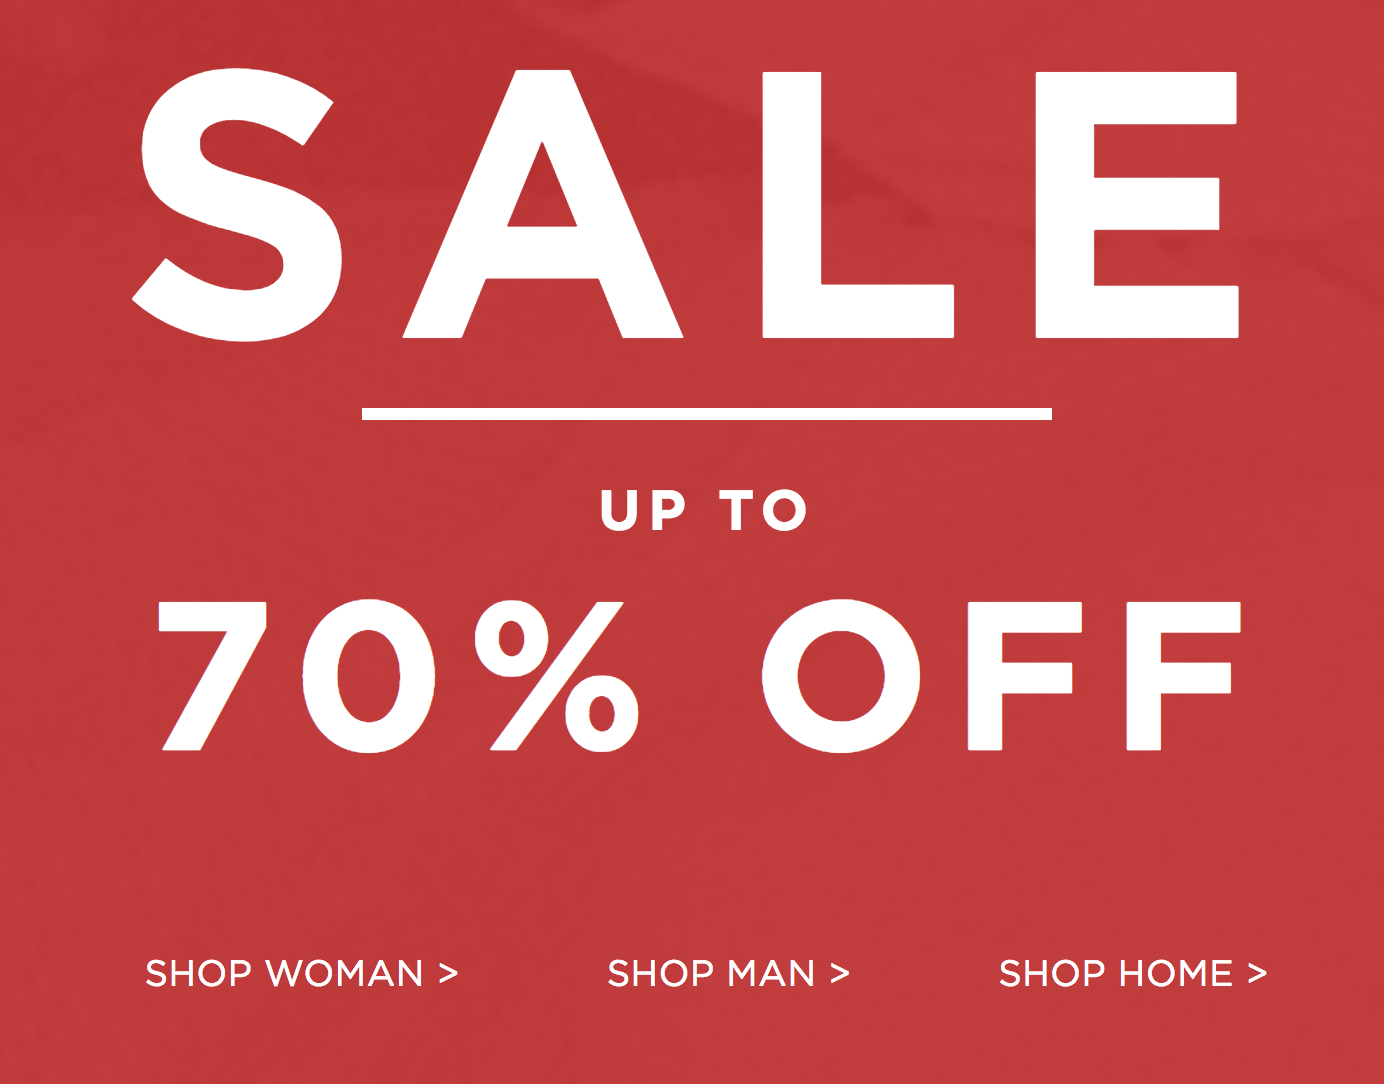 French Connection: Sale up to 70% off women's and men's clothes and homeware items